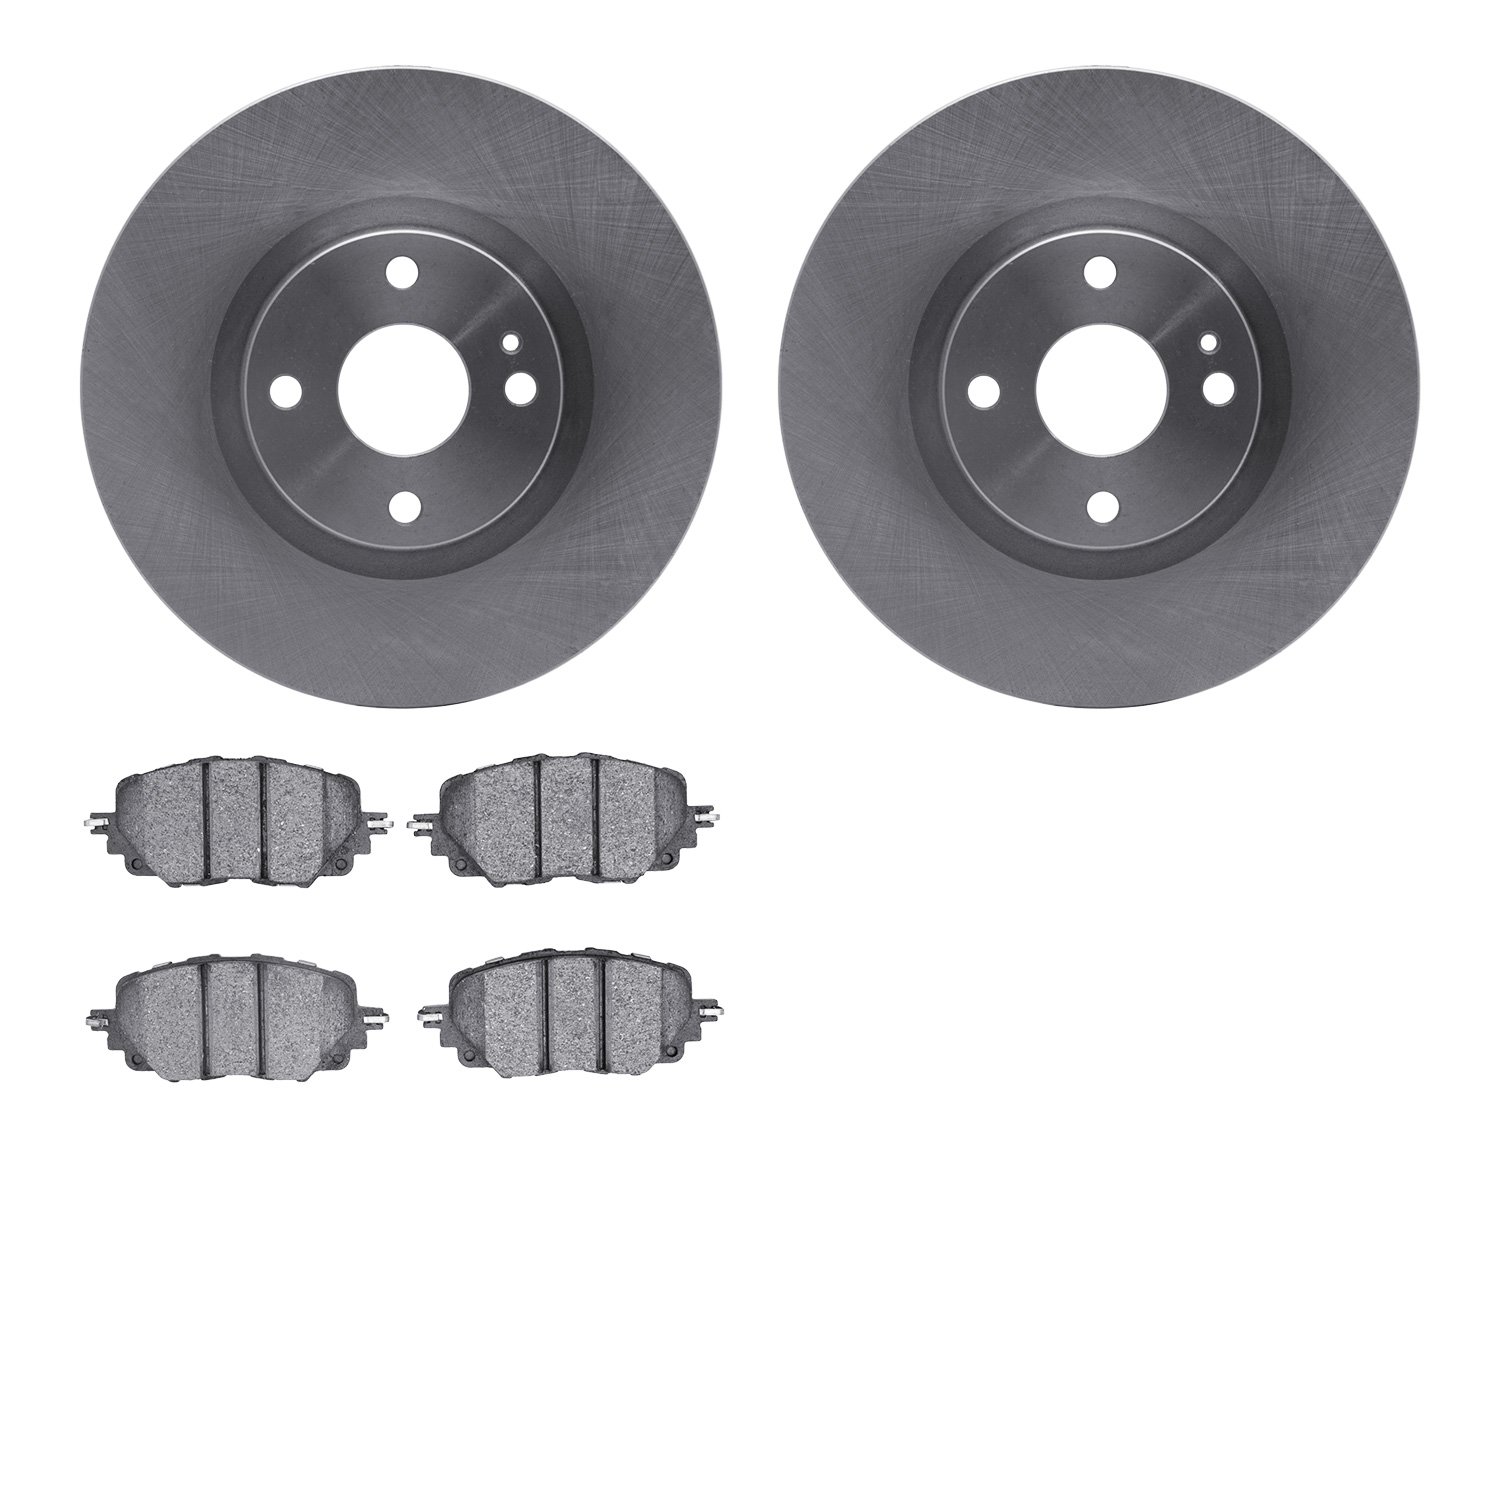 6302-80086 Brake Rotors with 3000-Series Ceramic Brake Pads Kit, Fits Select Multiple Makes/Models, Position: Front